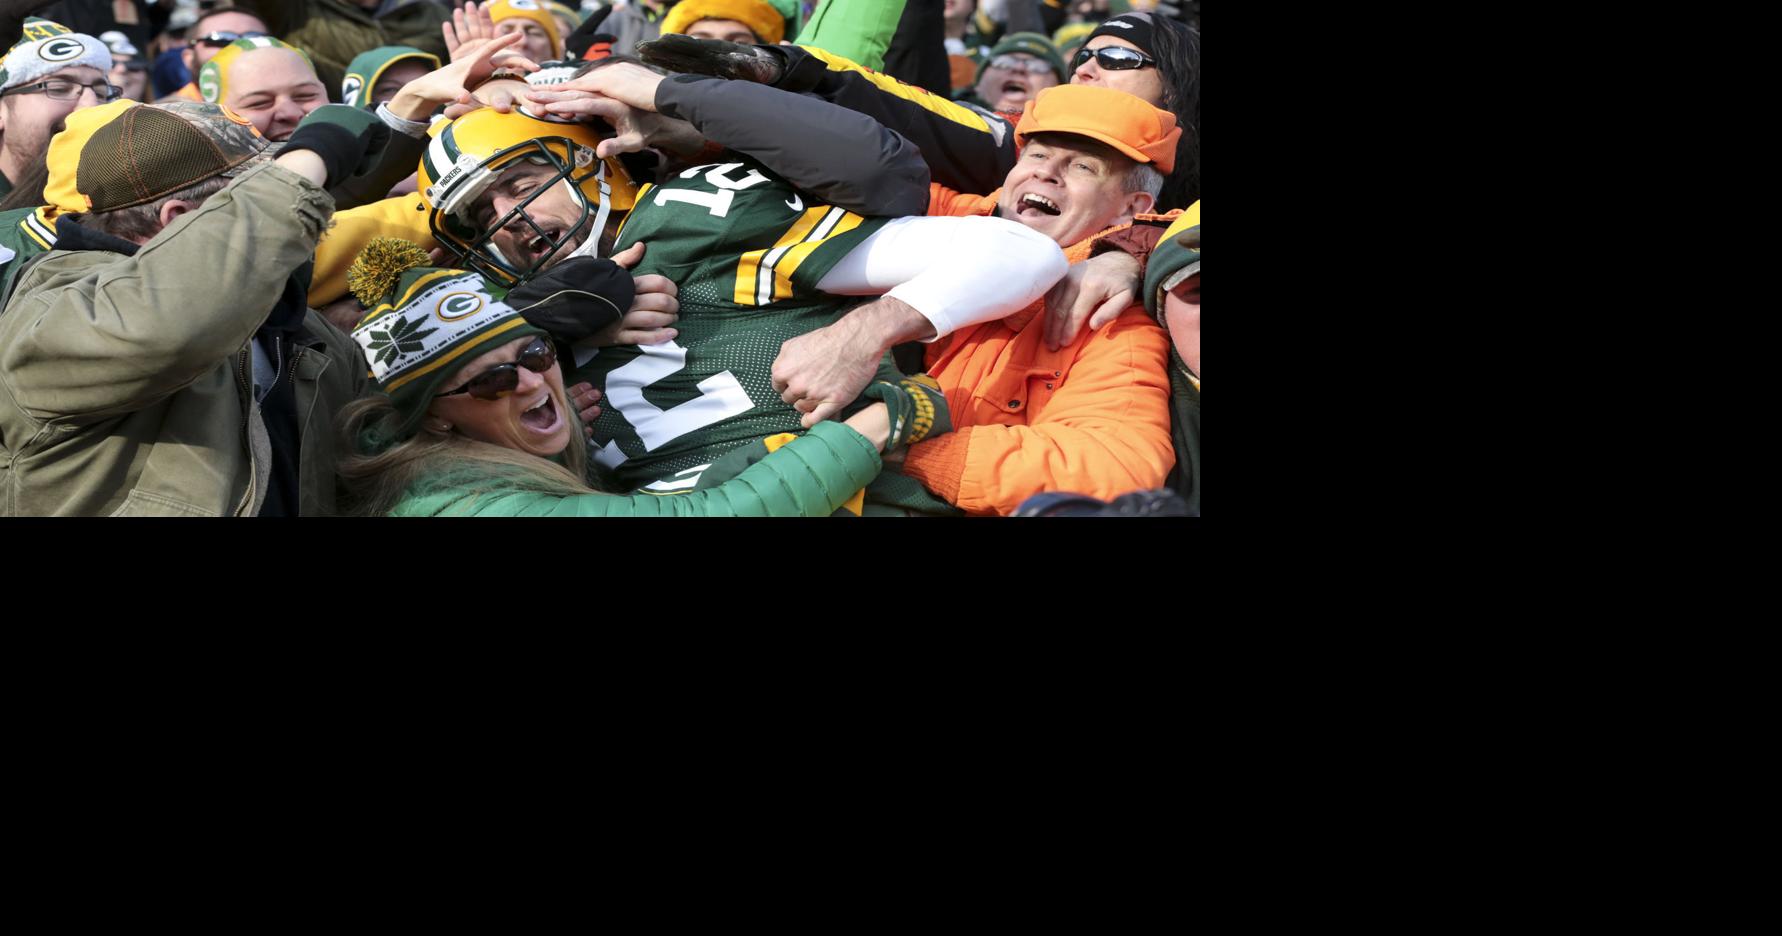 Packers: 8 straight years of raised ticket prices haven't deterred fans